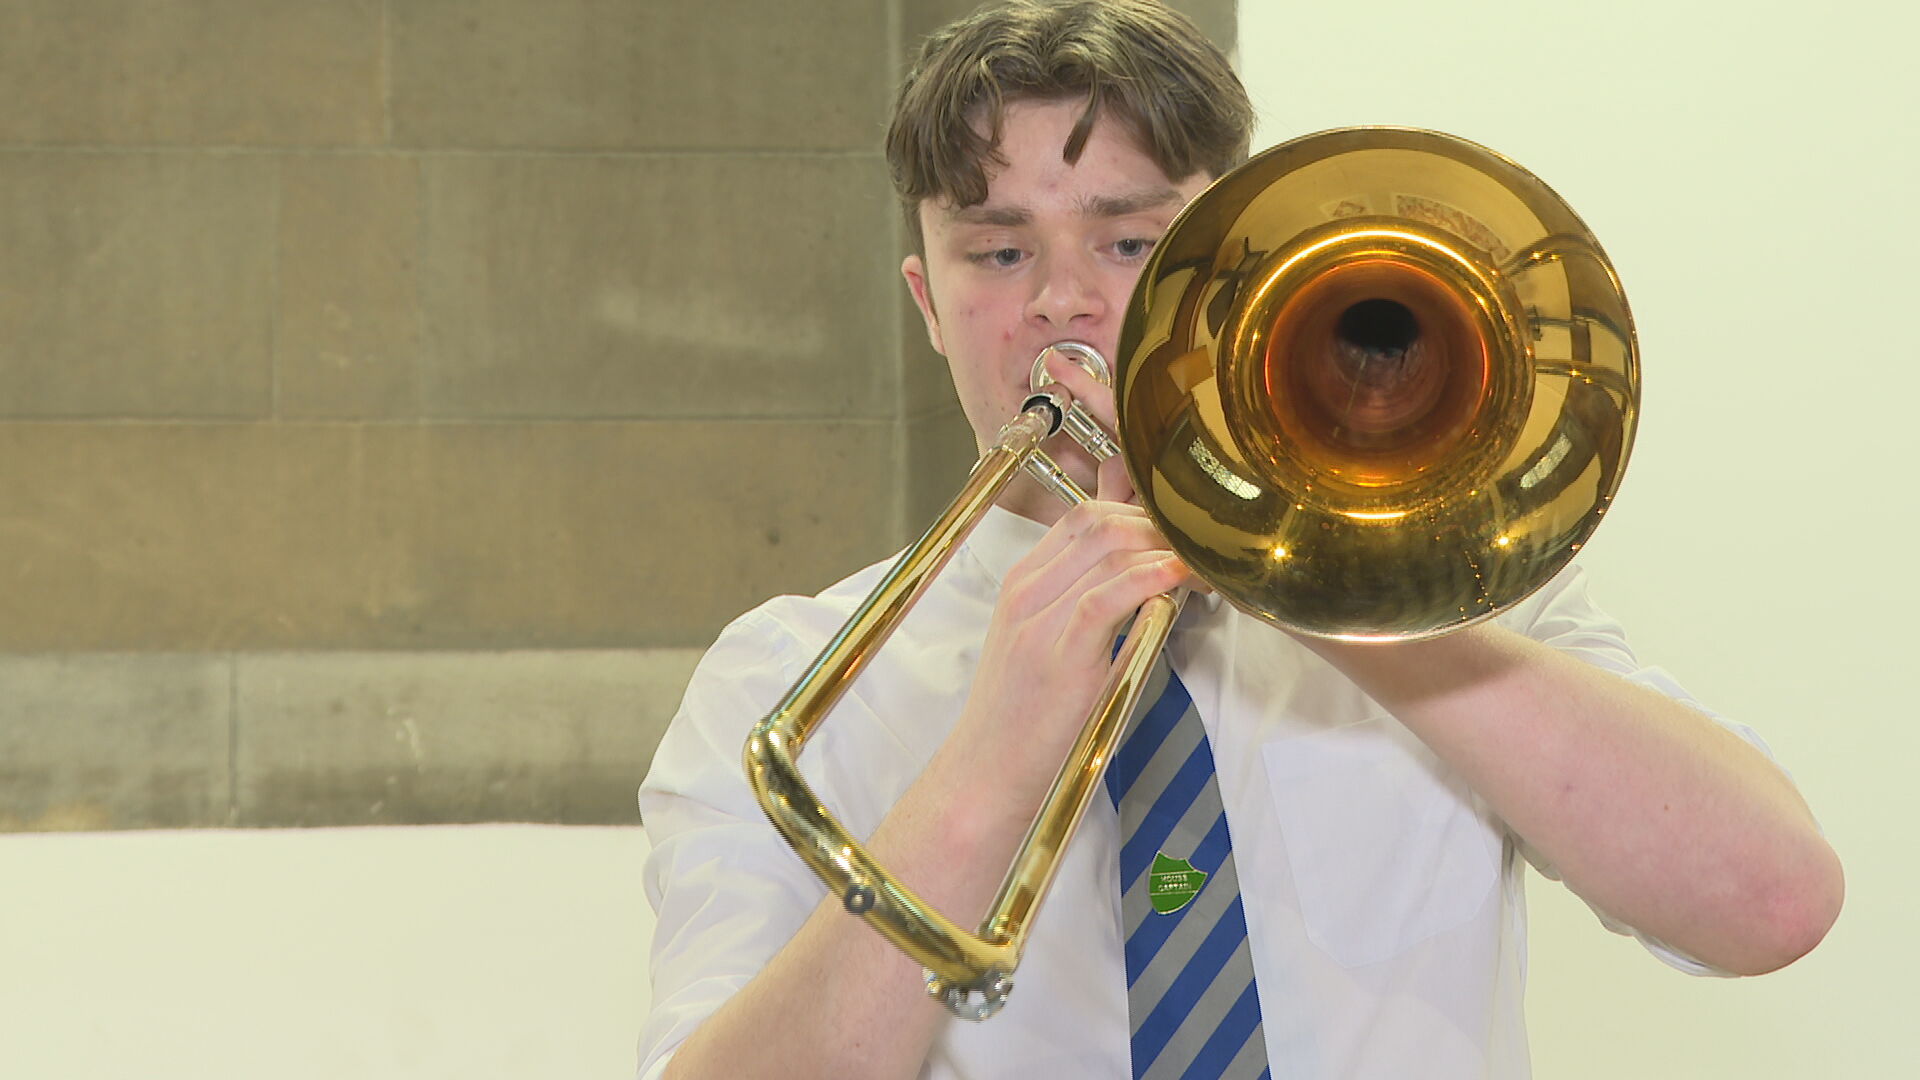 Benjamin Thomas hopes other young people will get the same opportunity to try out a brass instrument like he did.